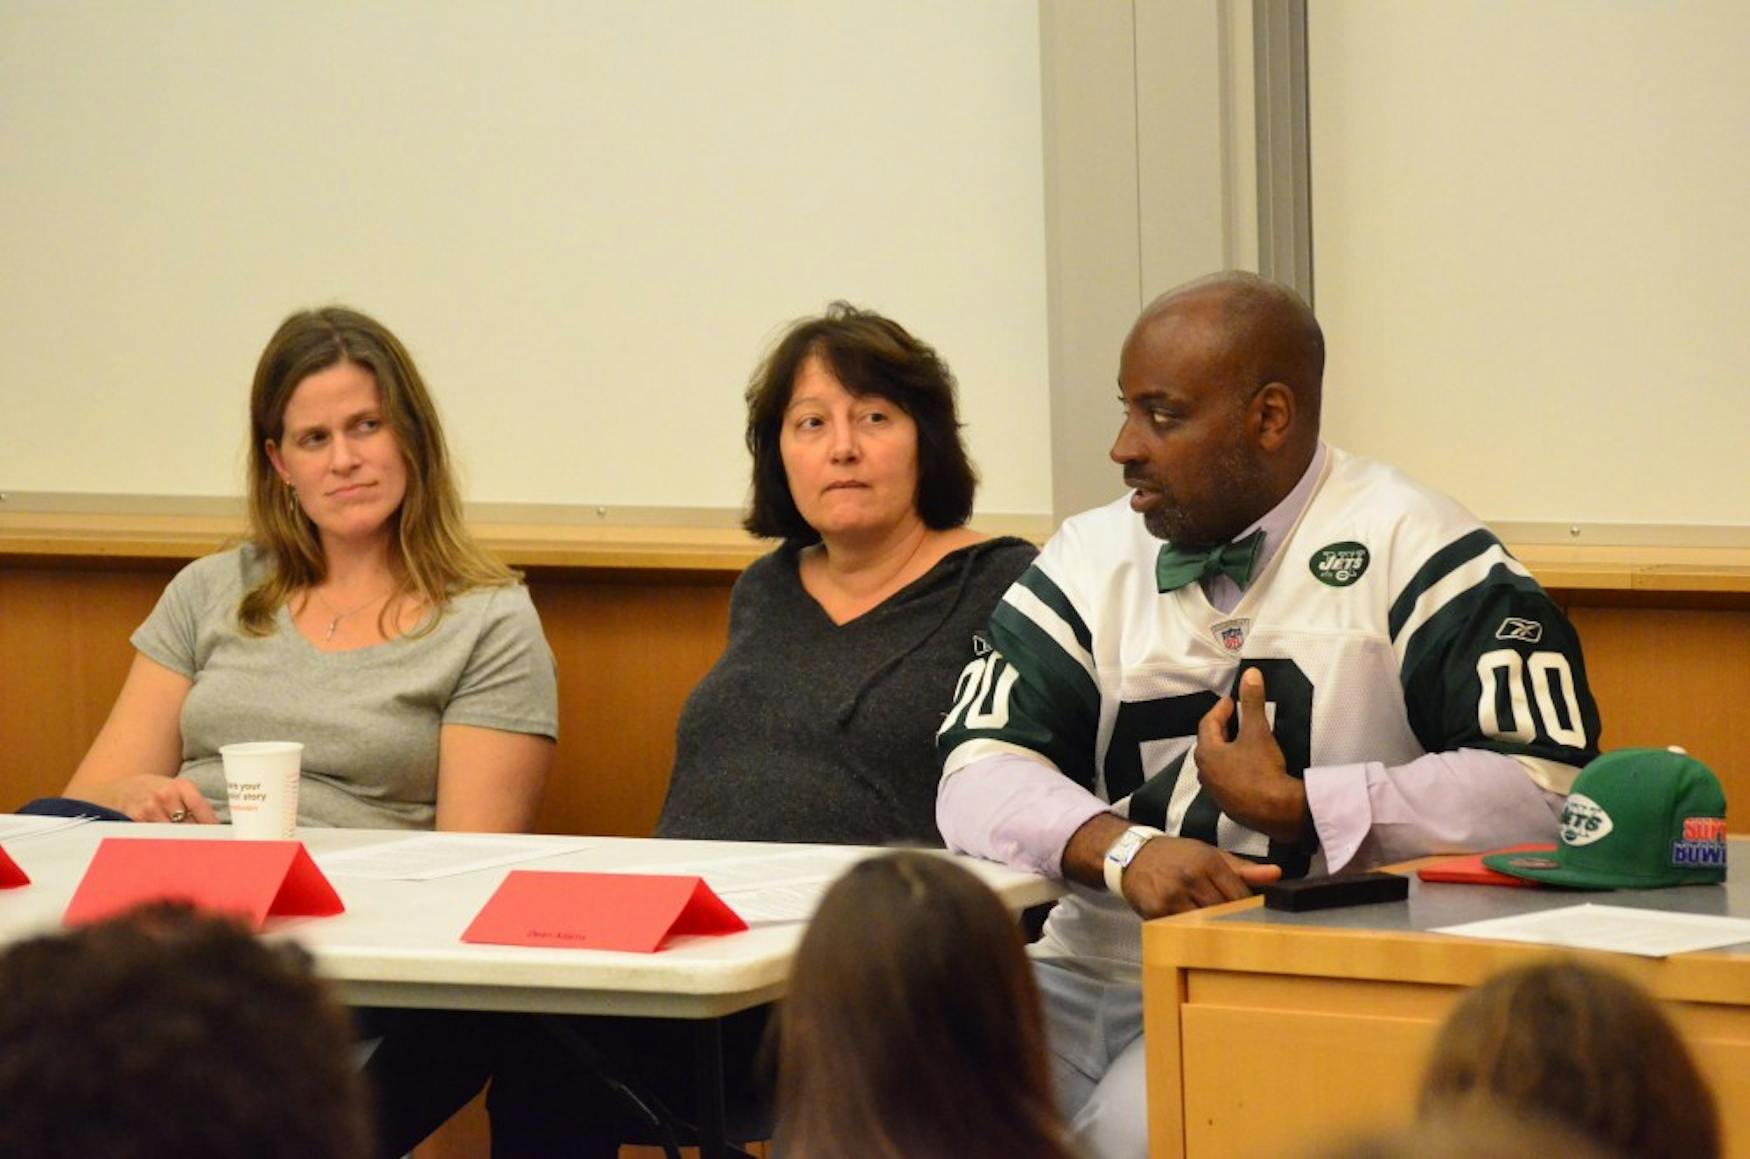 ARTISTIC JUSTICE: From left to right Profs. Jennifer Cleary (THA) and Adrianne Krstansky (THA) and Dean of Students, Jamele Adams spoke about the role of social justice in art.